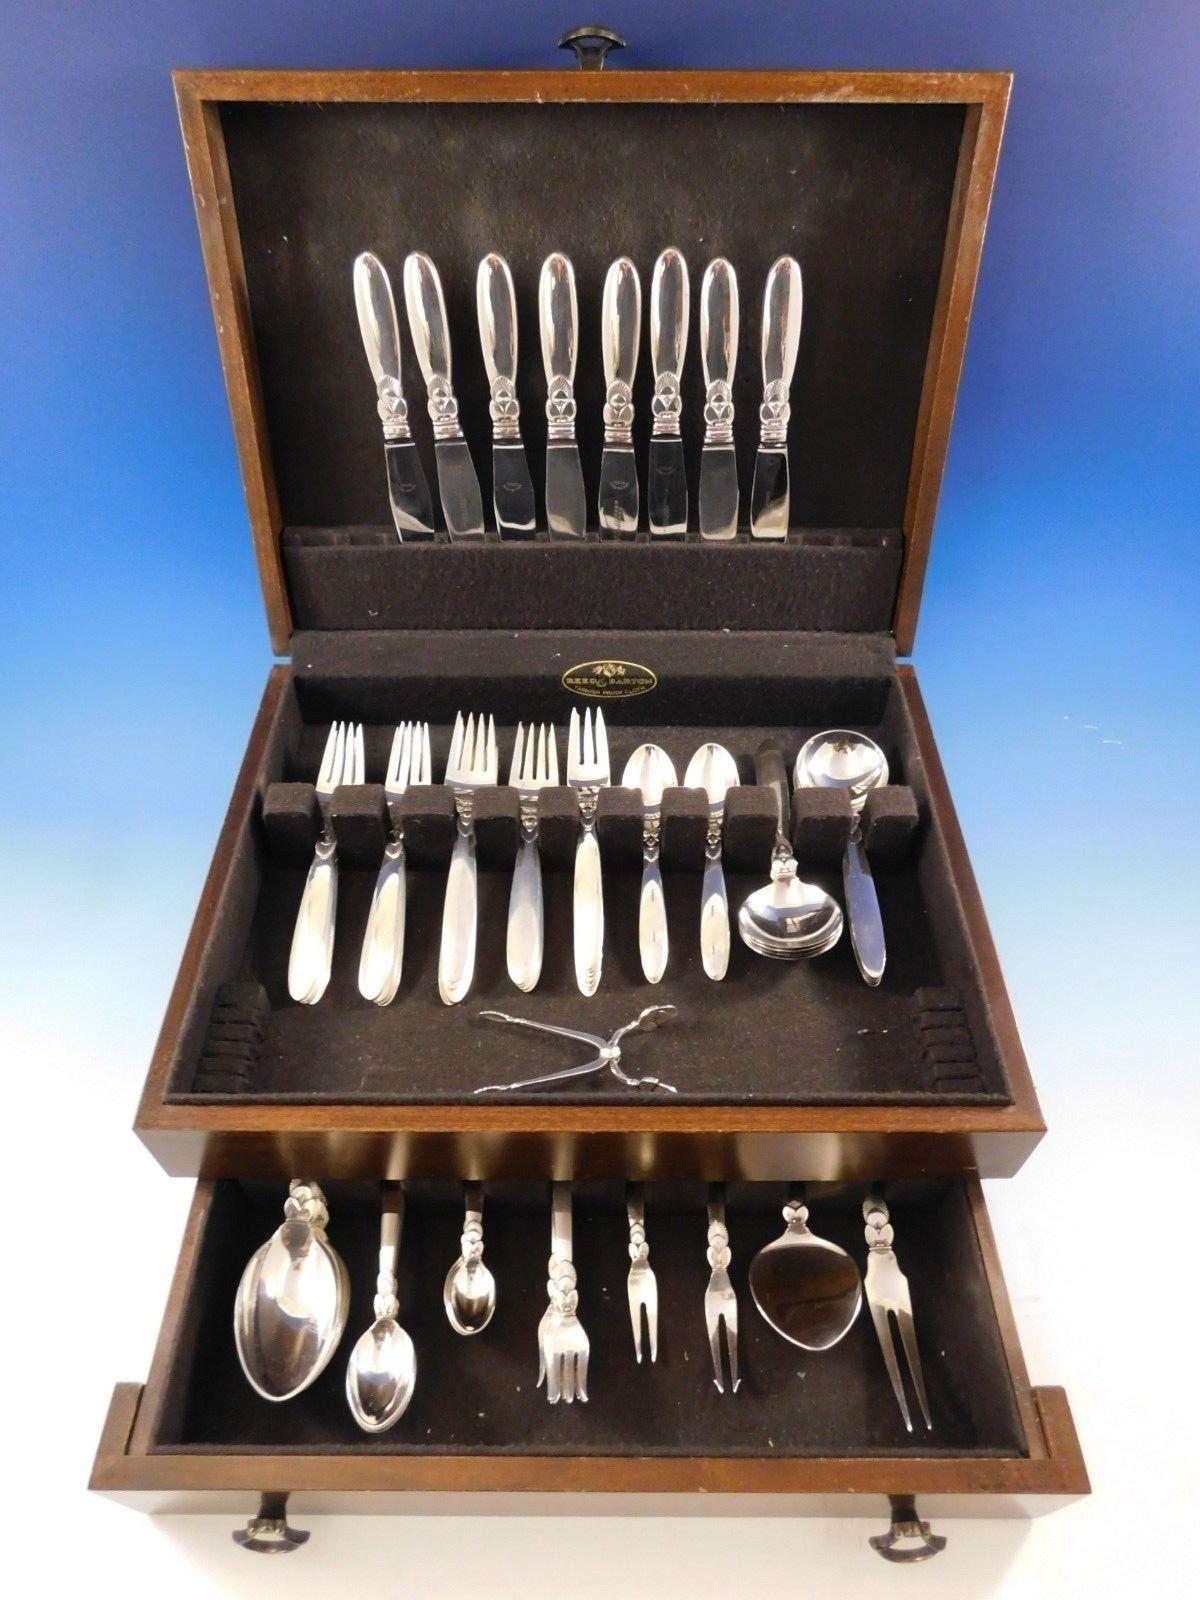 Cactus by Georg Jensen Danish sterling silver flatware set - 85 pieces. This set includes:

8 knives, short handle, 8